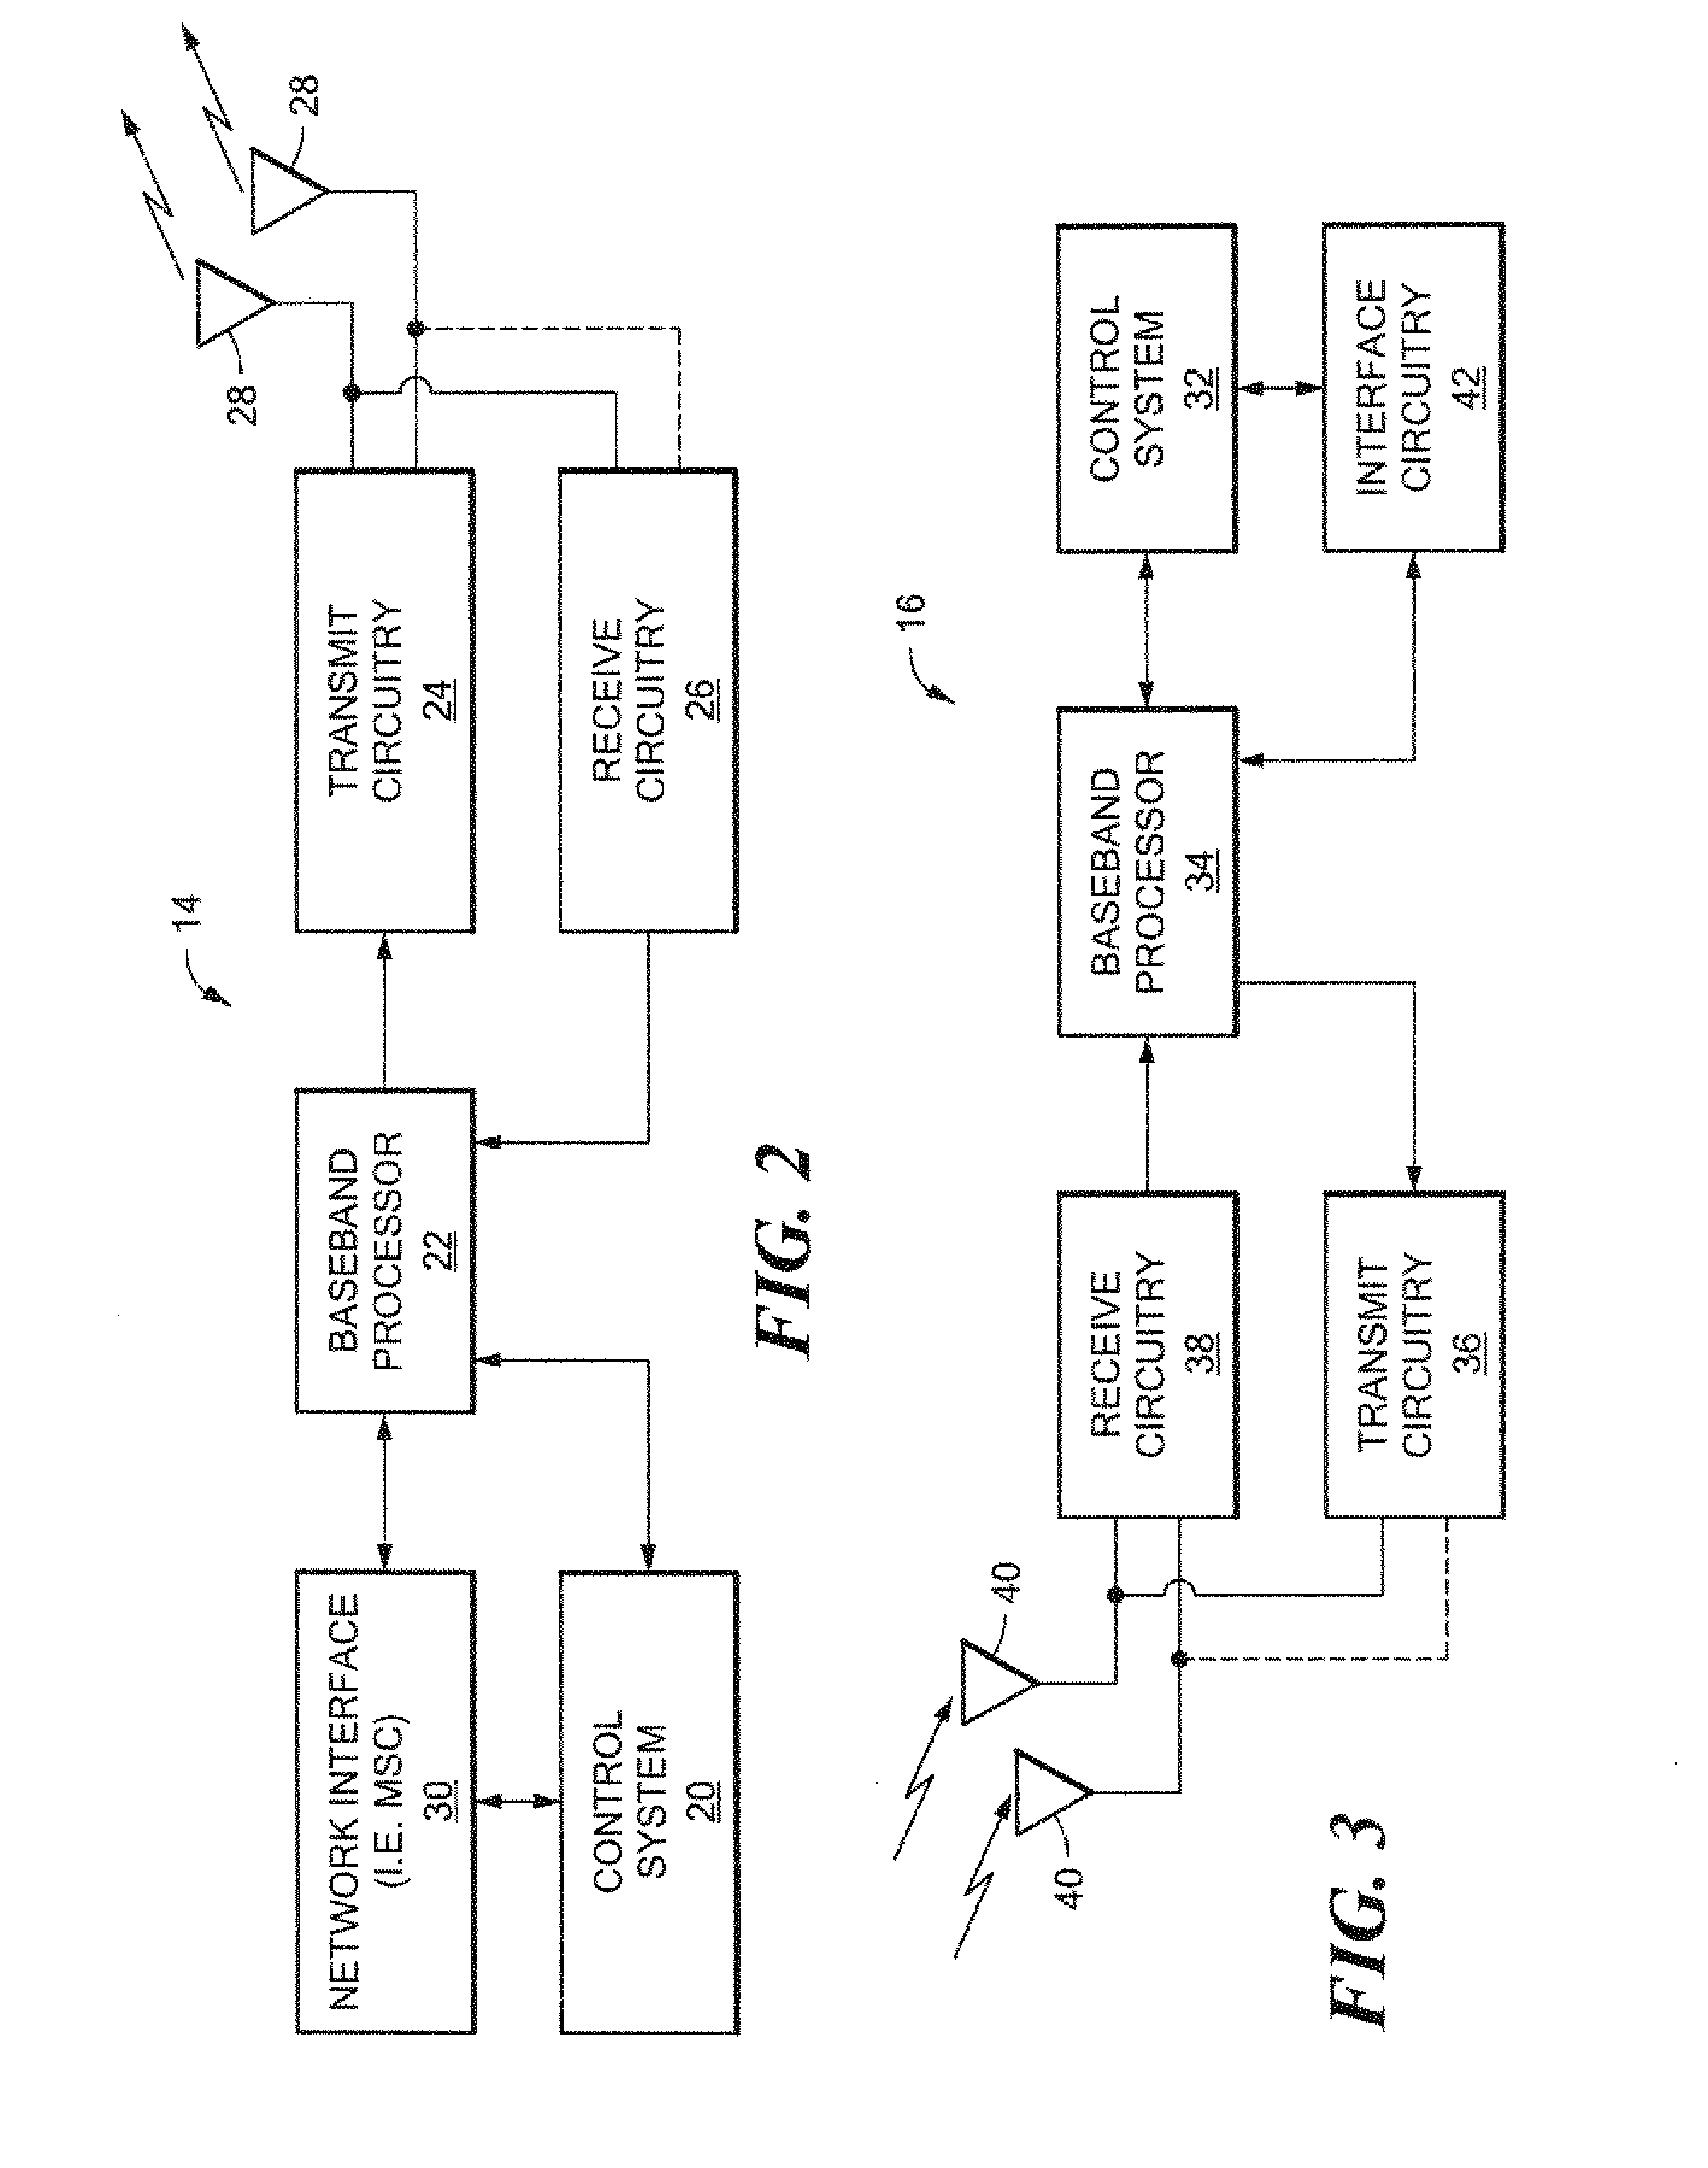 Method and system for wireless communication in multiple operating environments